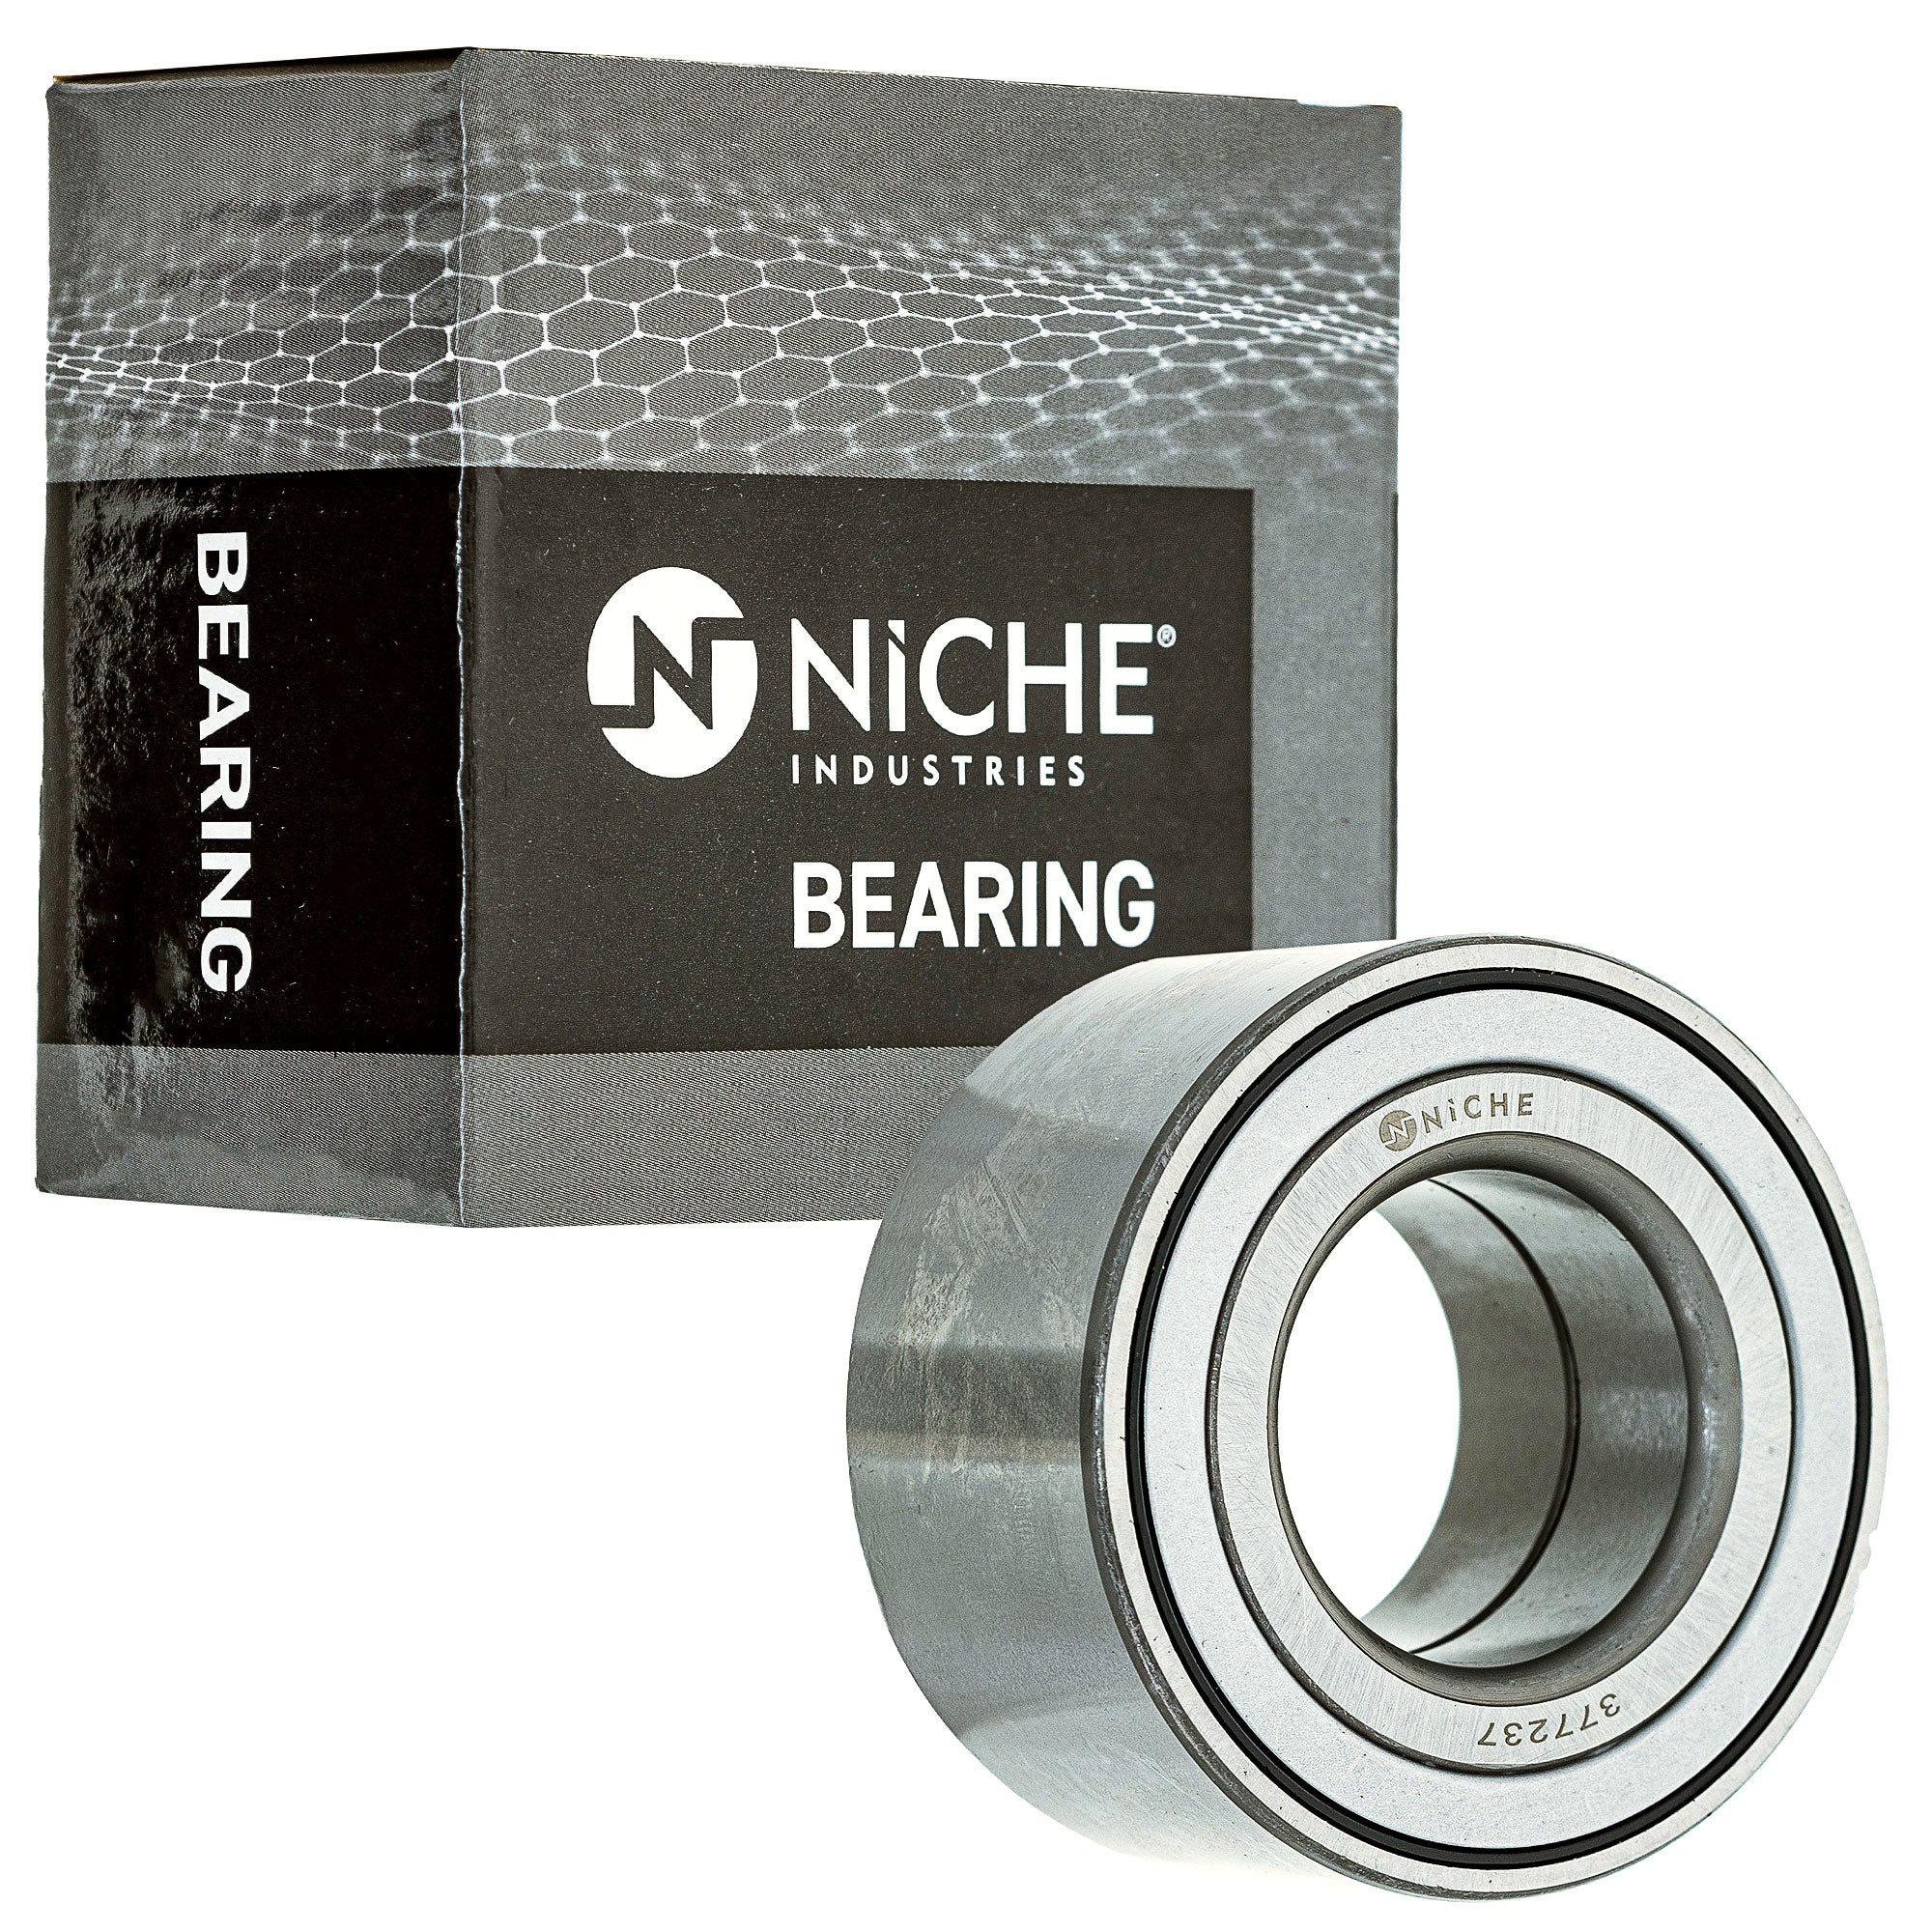 NICHE 519-CBB2326R Bearing 10-Pack for zOTHER Pioneer